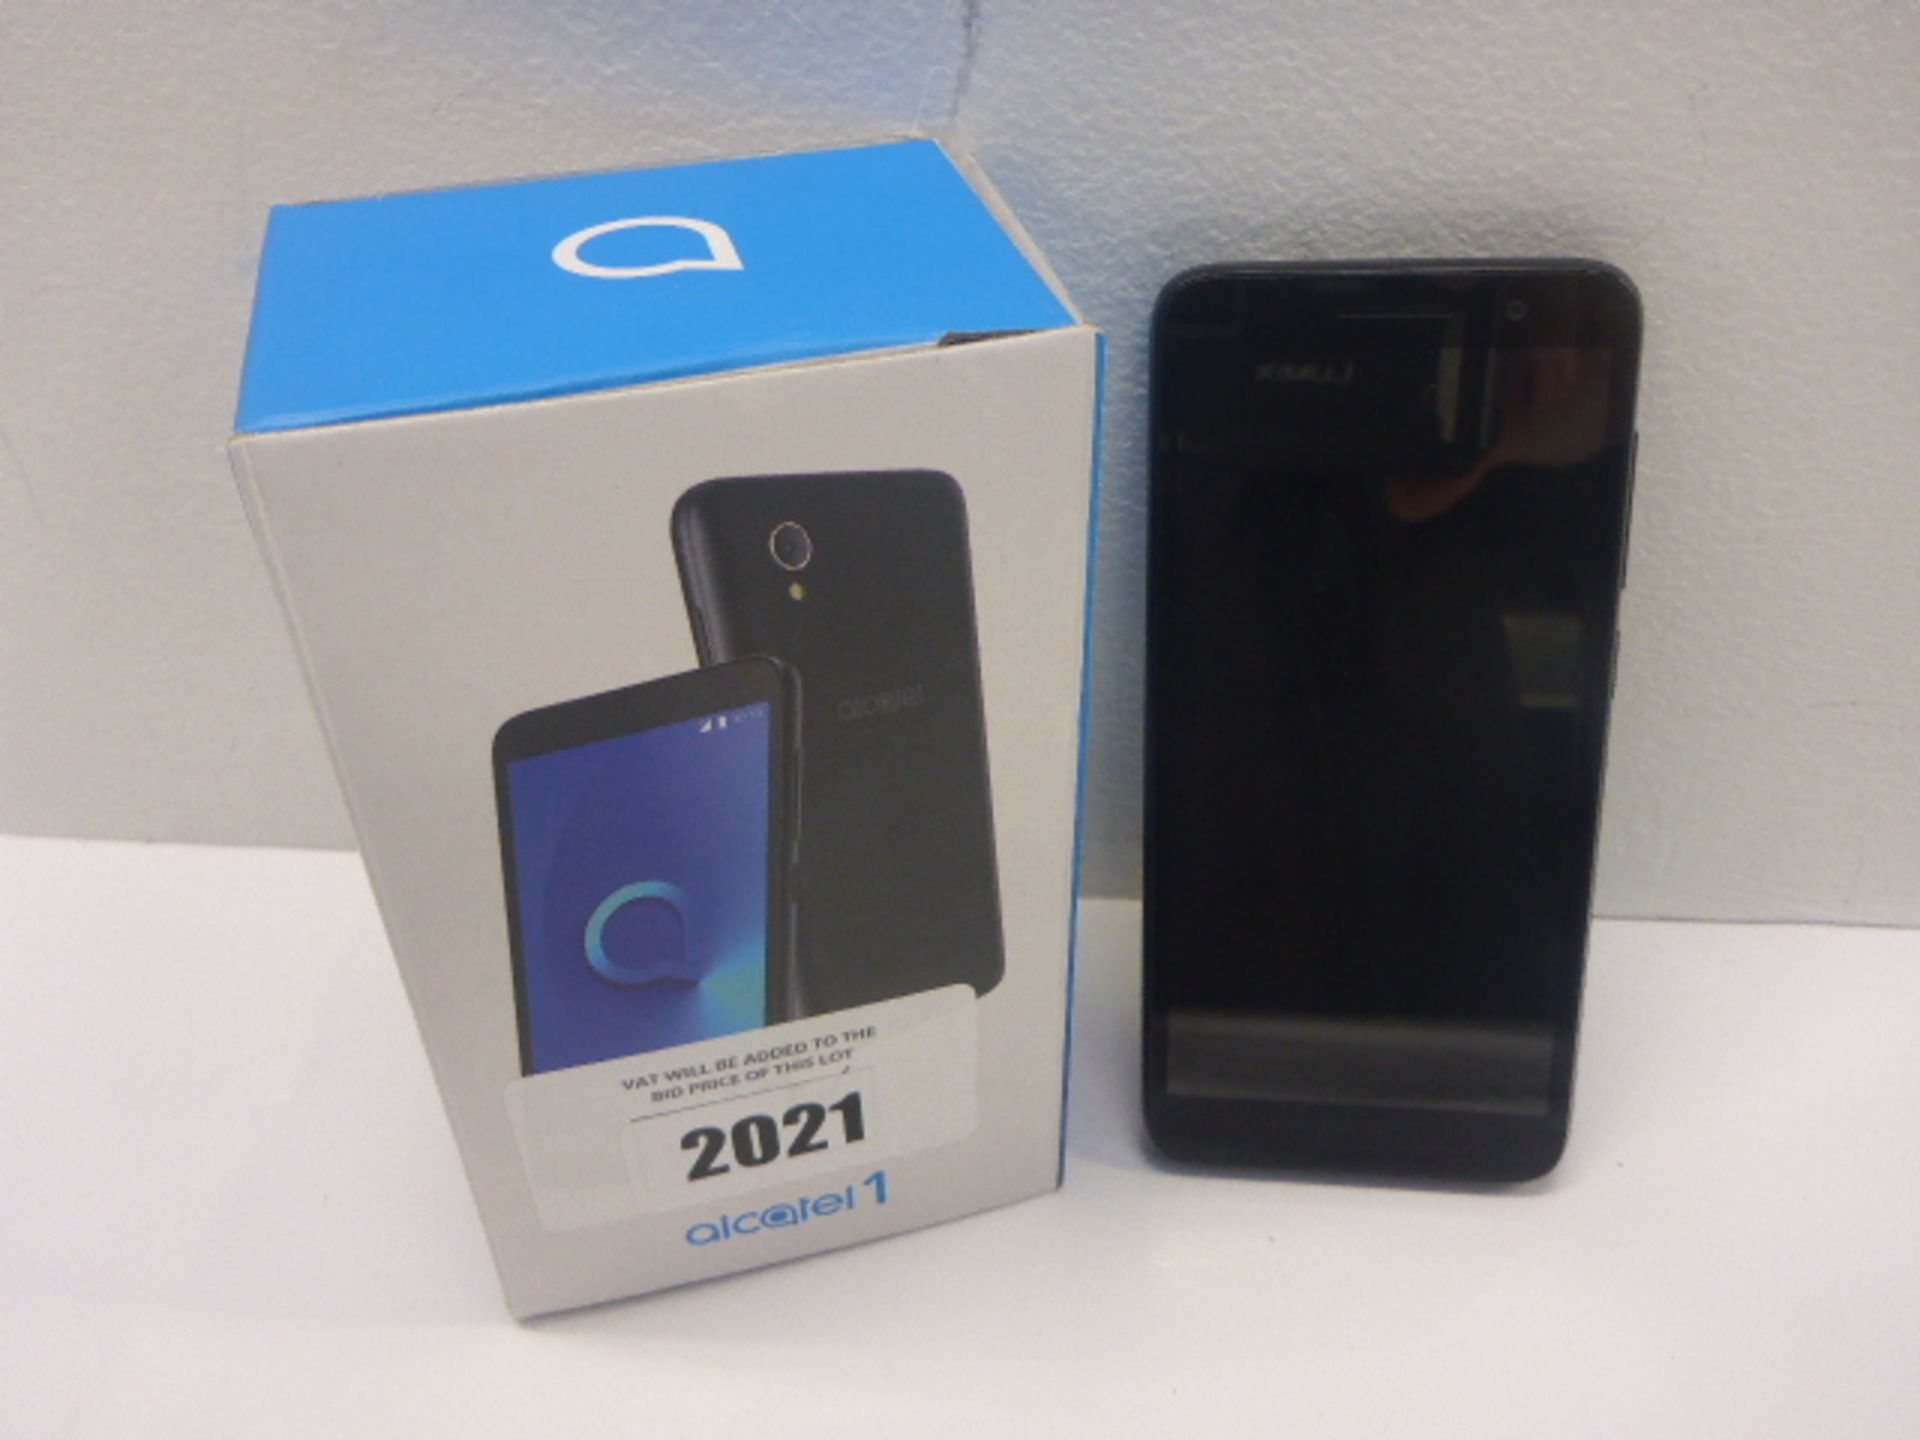 Alcatel 1 Android Mobile 8GB with box.